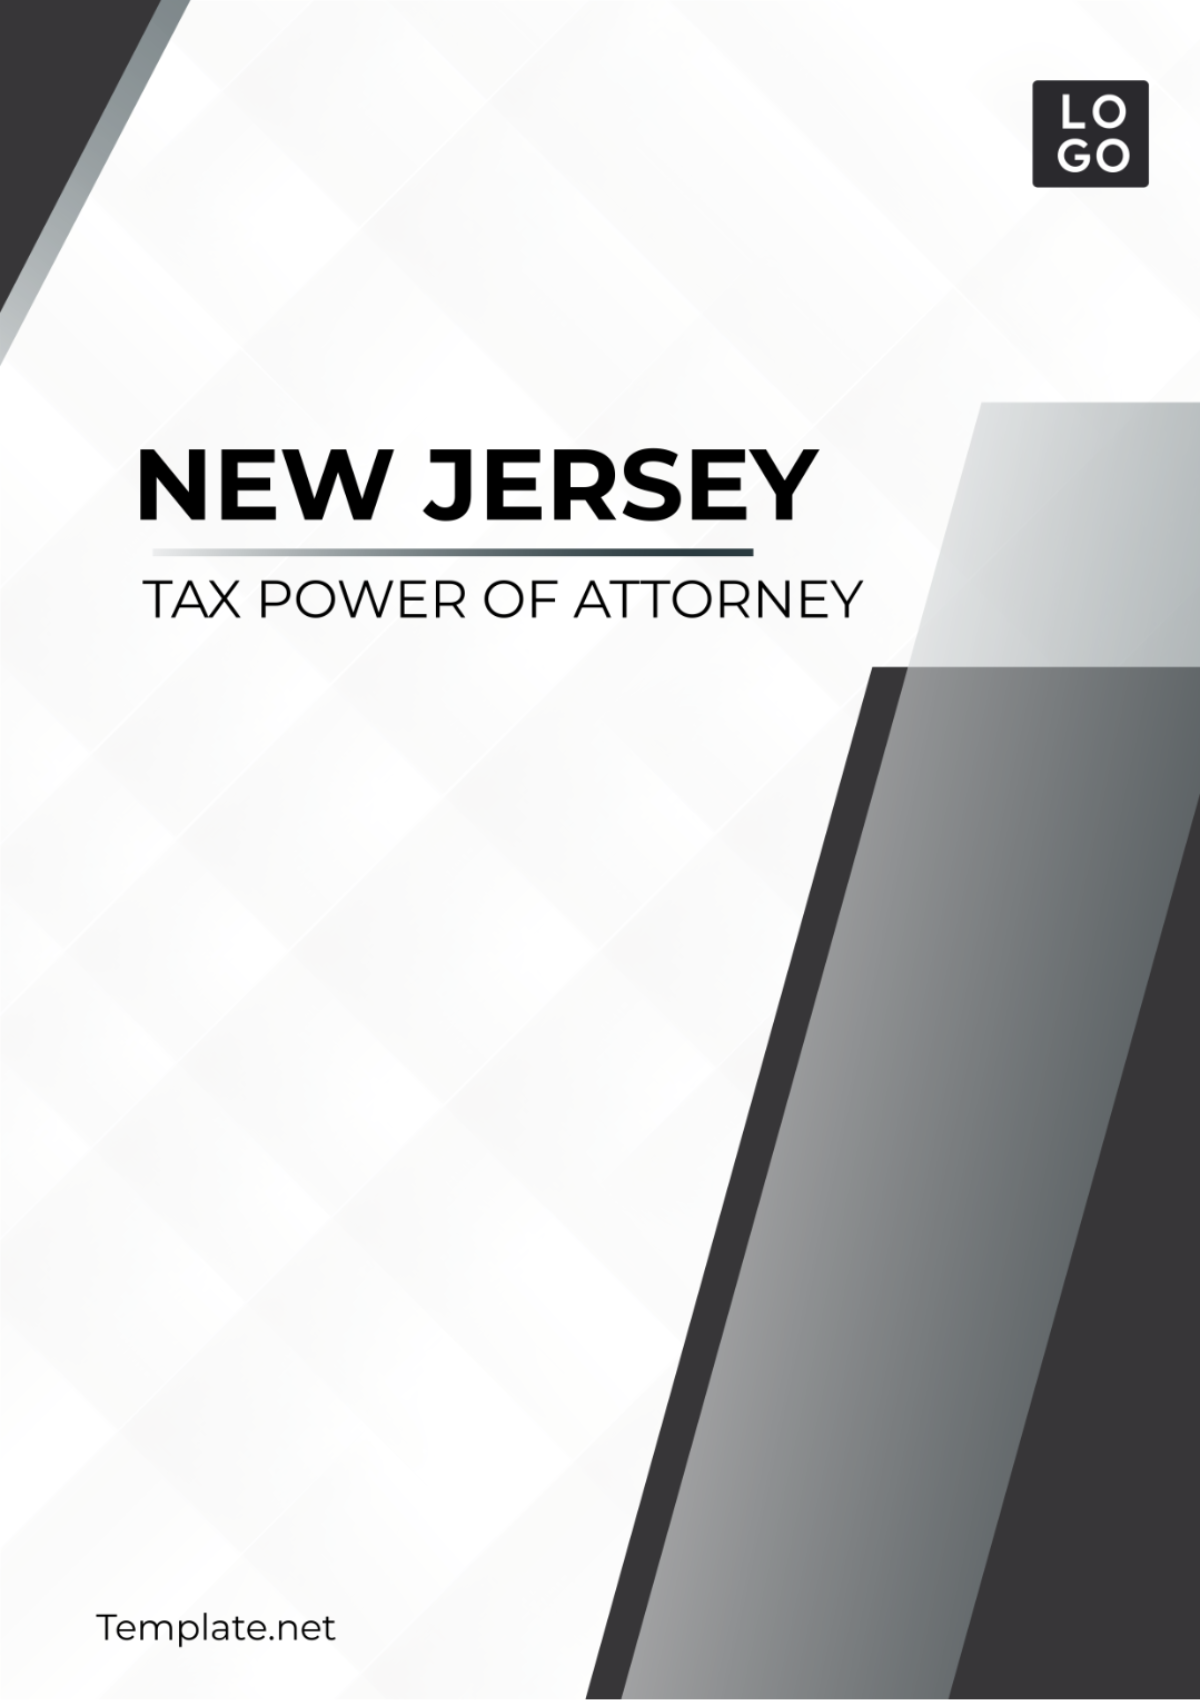 New Jersey Tax Power of Attorney Template